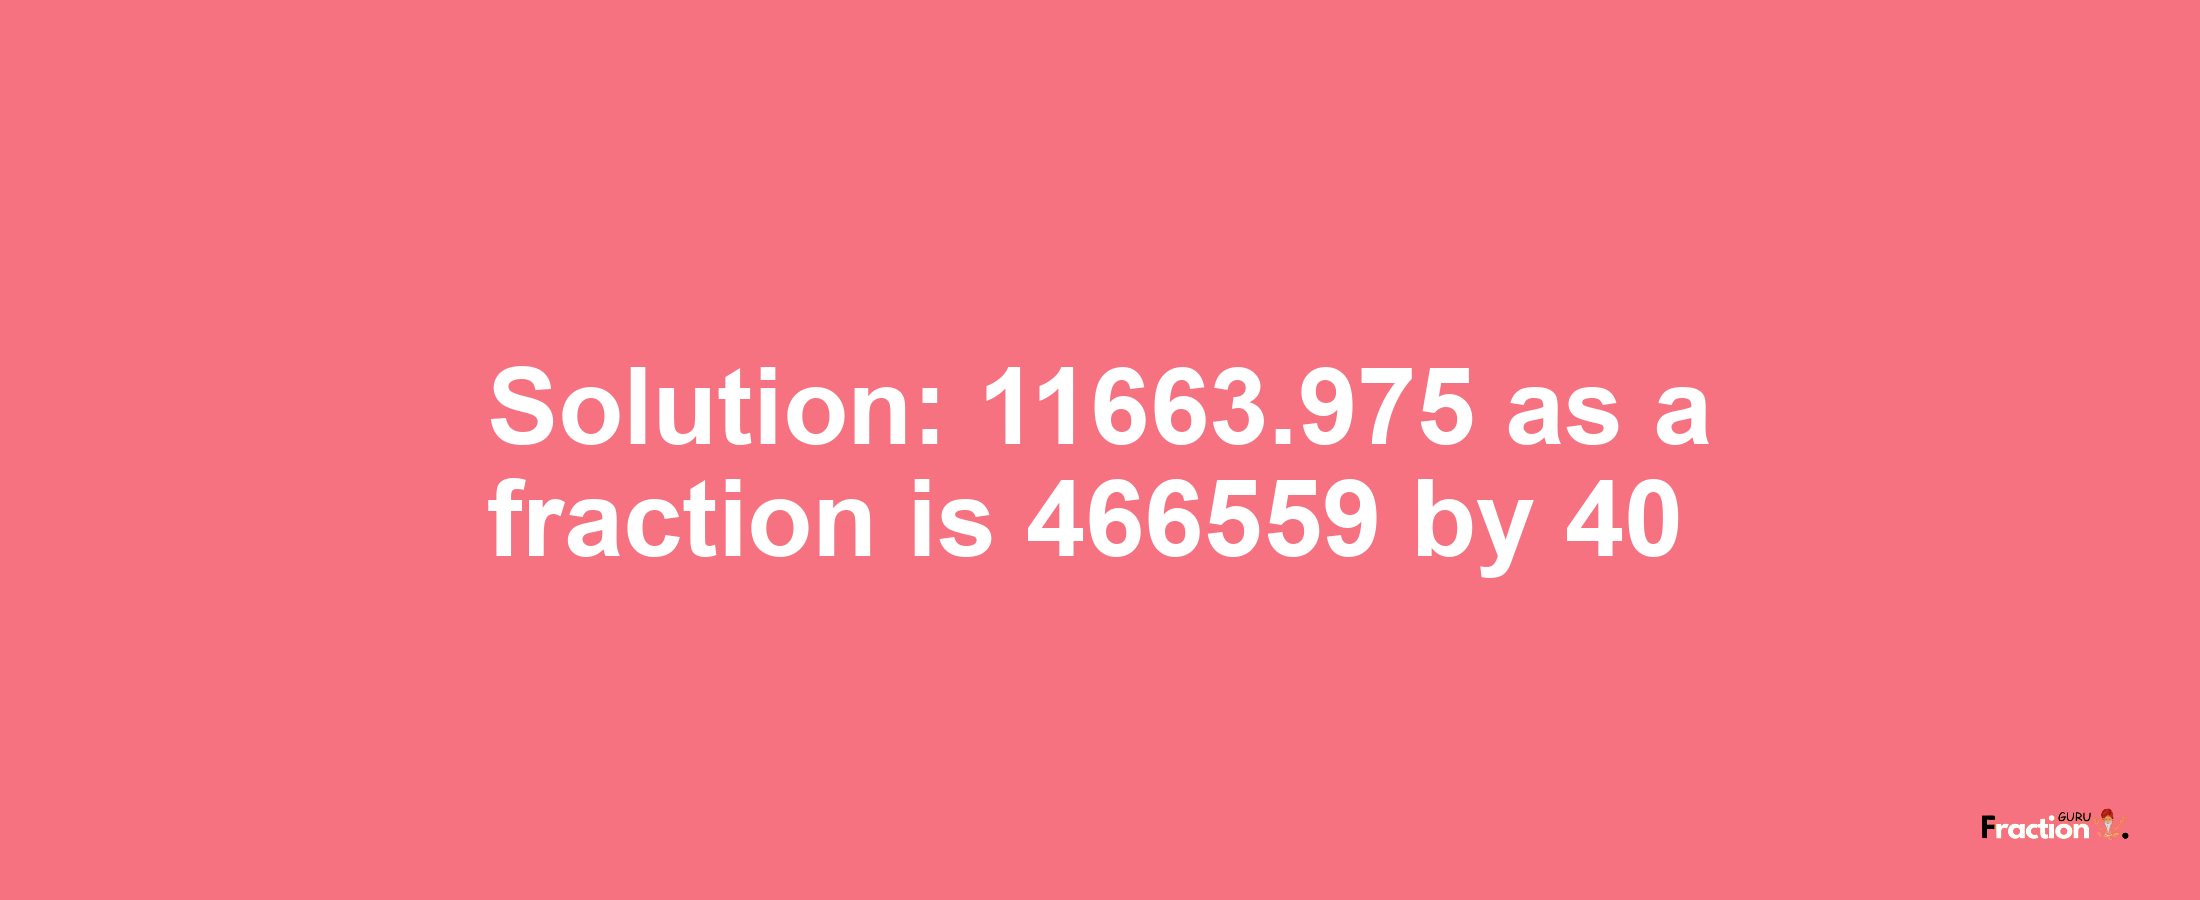 Solution:11663.975 as a fraction is 466559/40